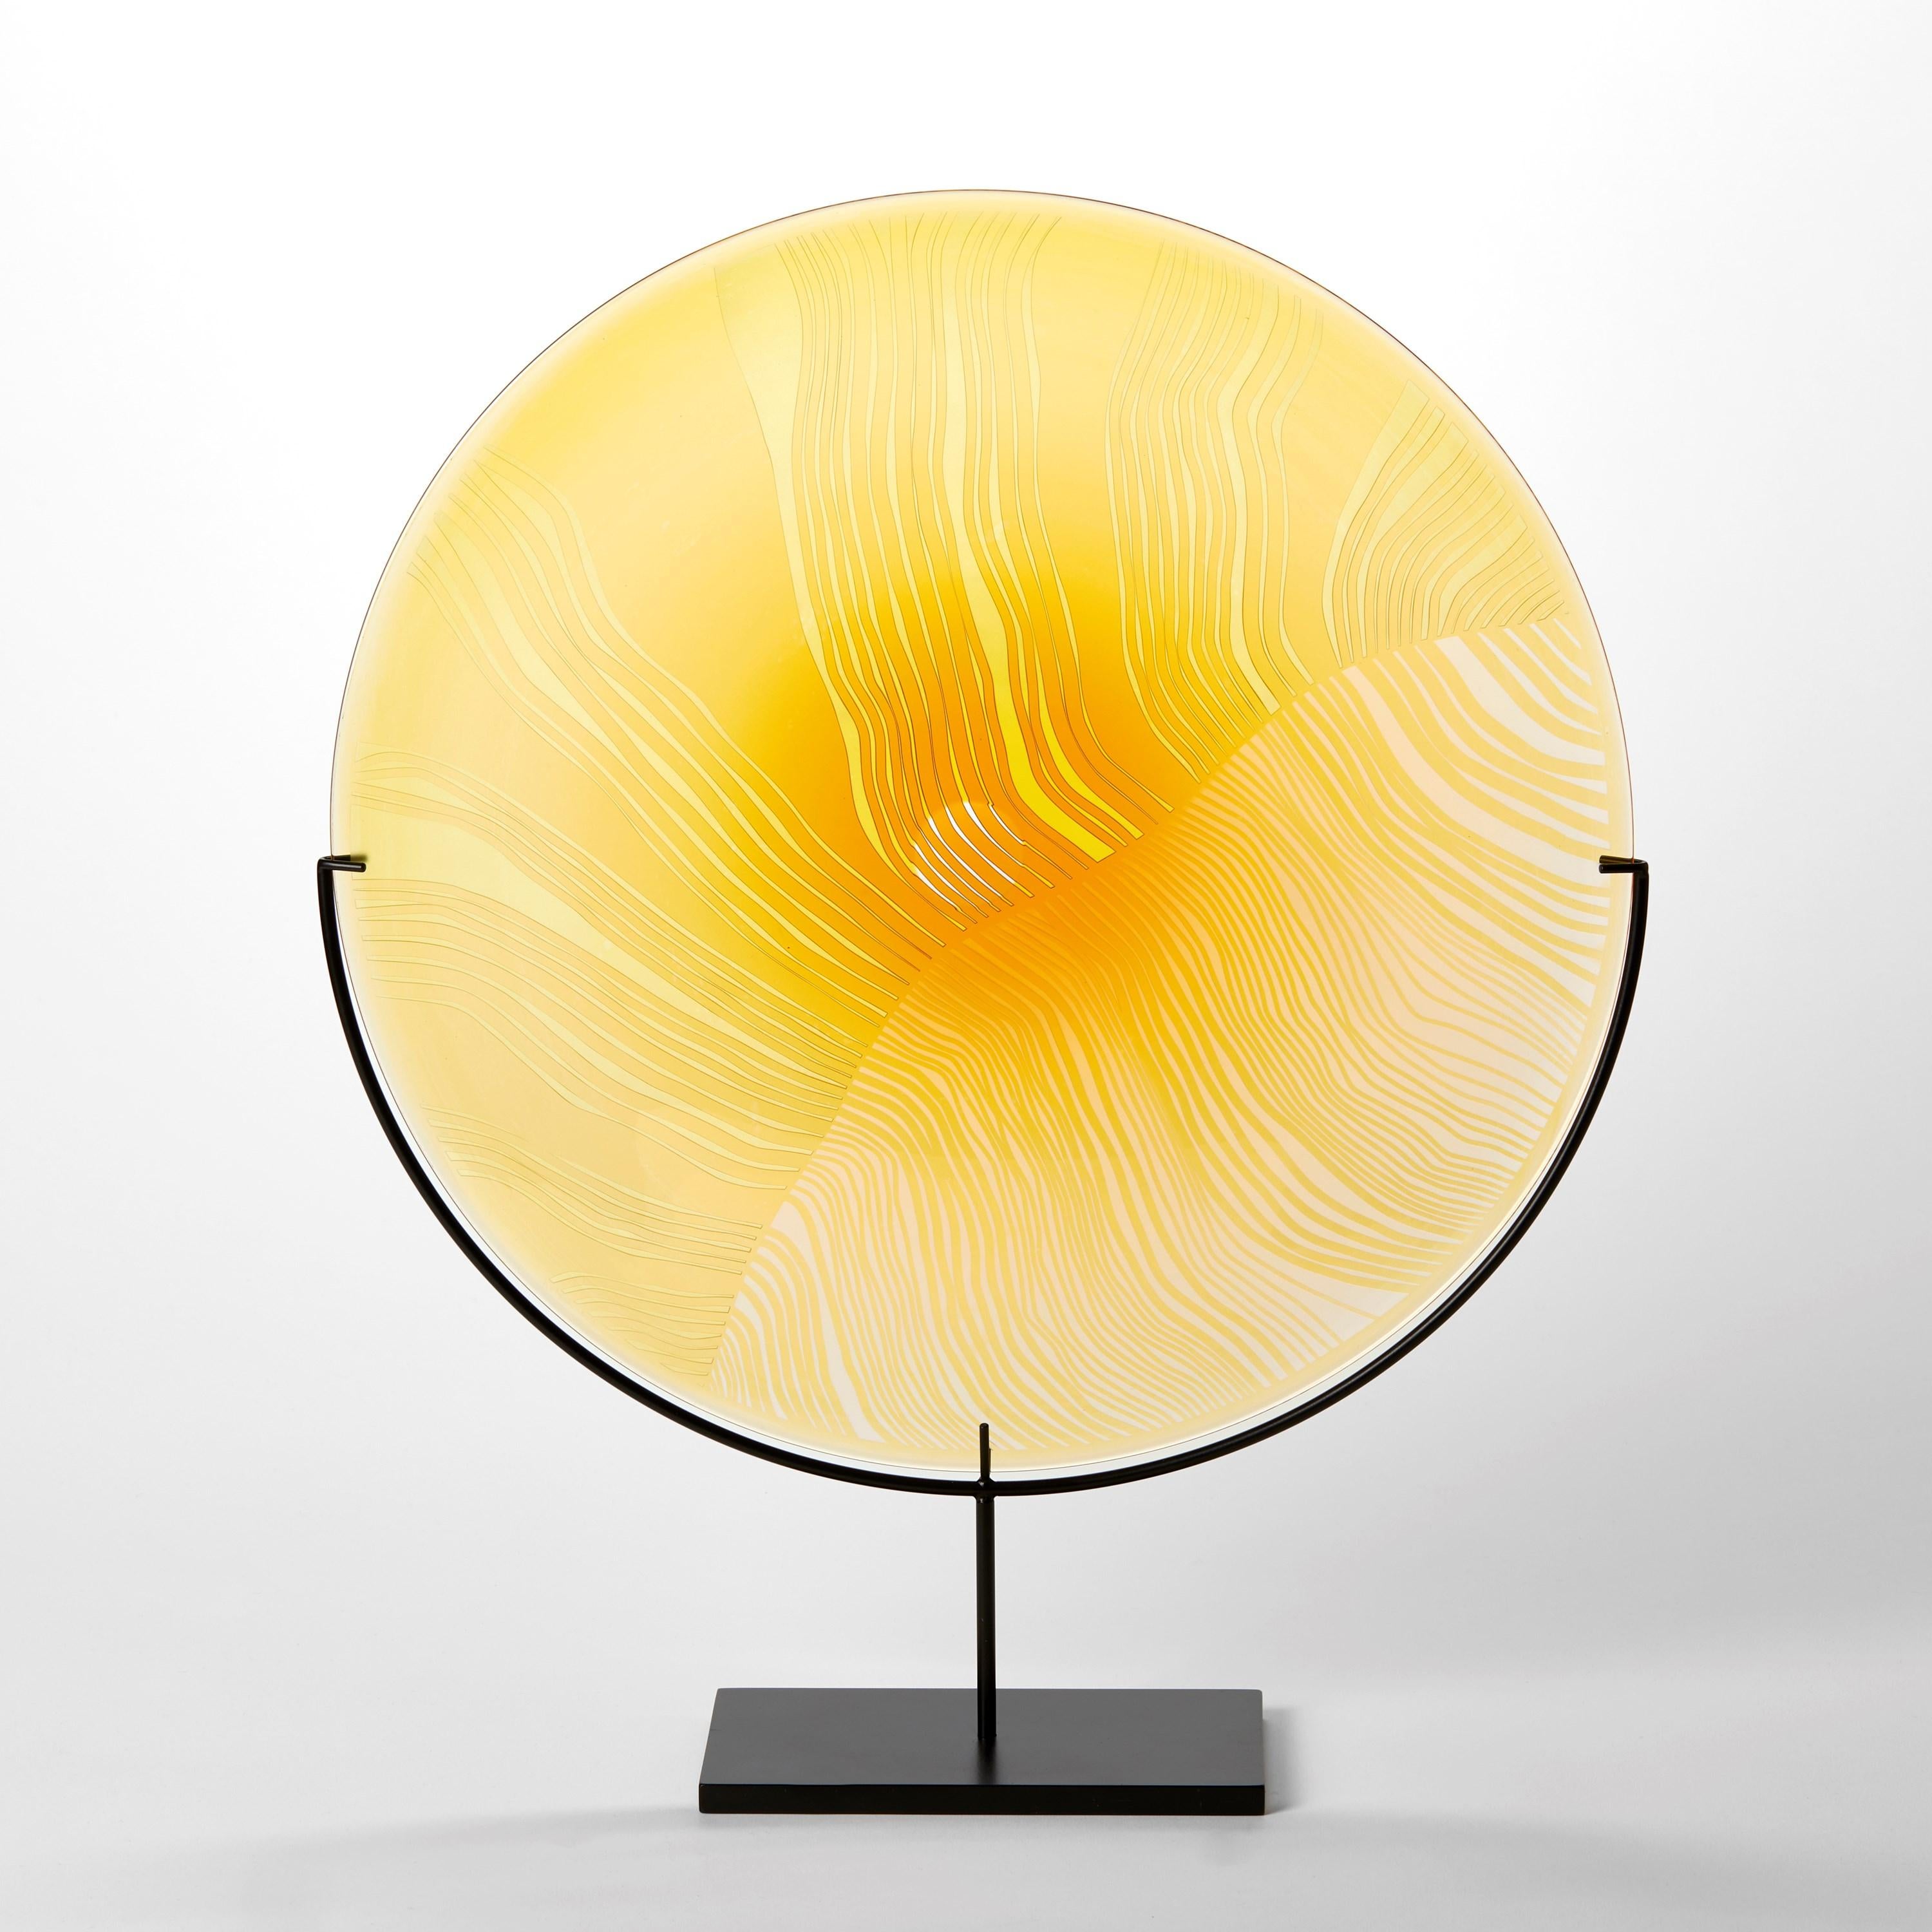 Organic Modern Solar Storm Gold over Gold, a mounted cut glass rondel artwork by Kate Jones For Sale